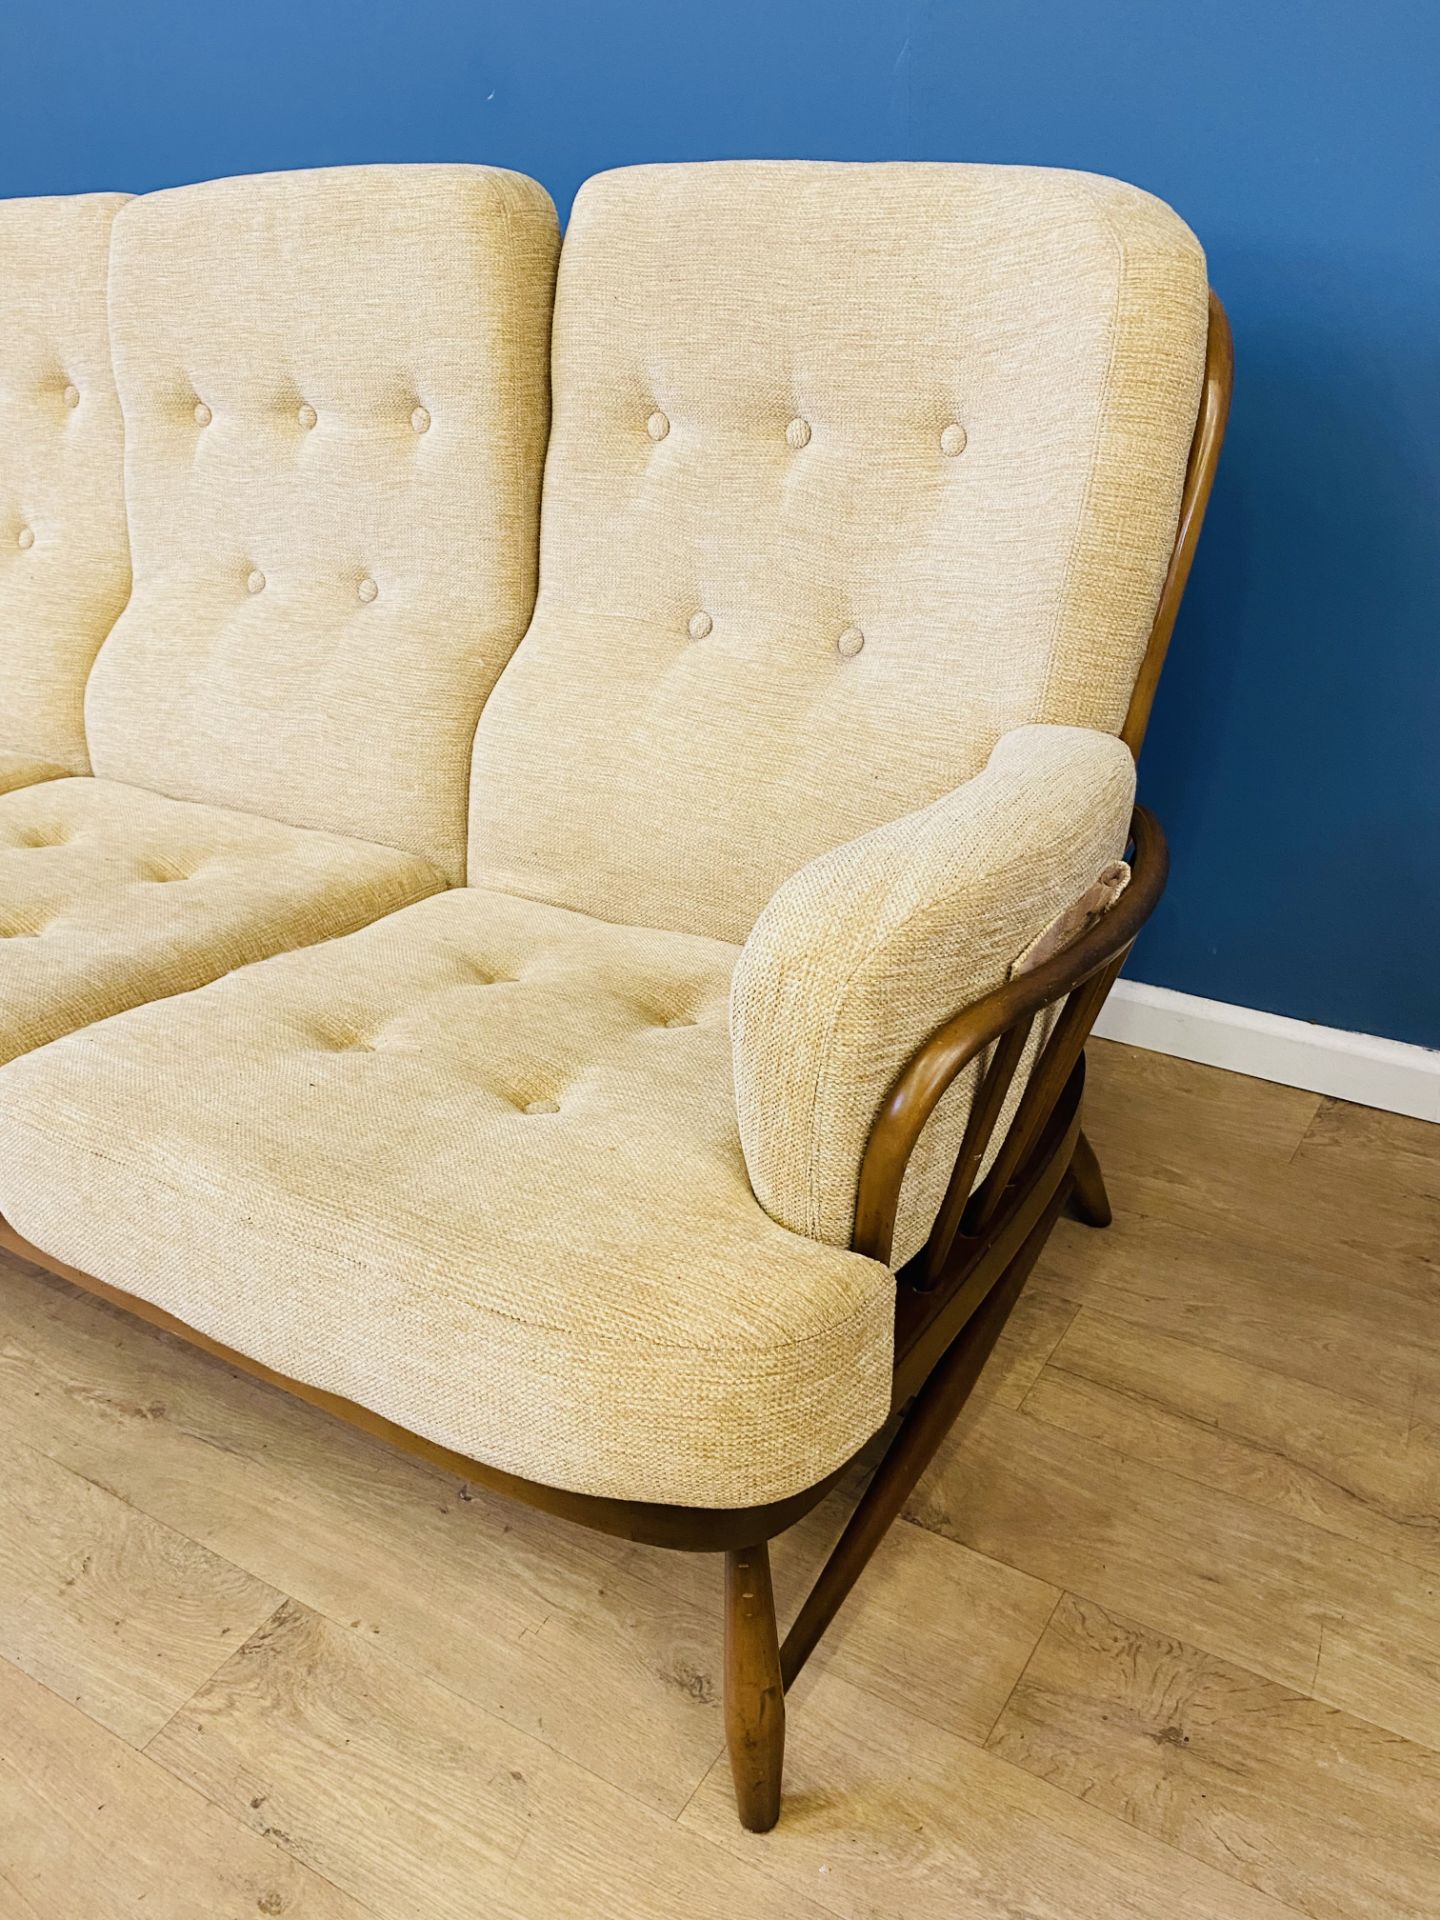 Ercol spindle back settee - Image 4 of 5